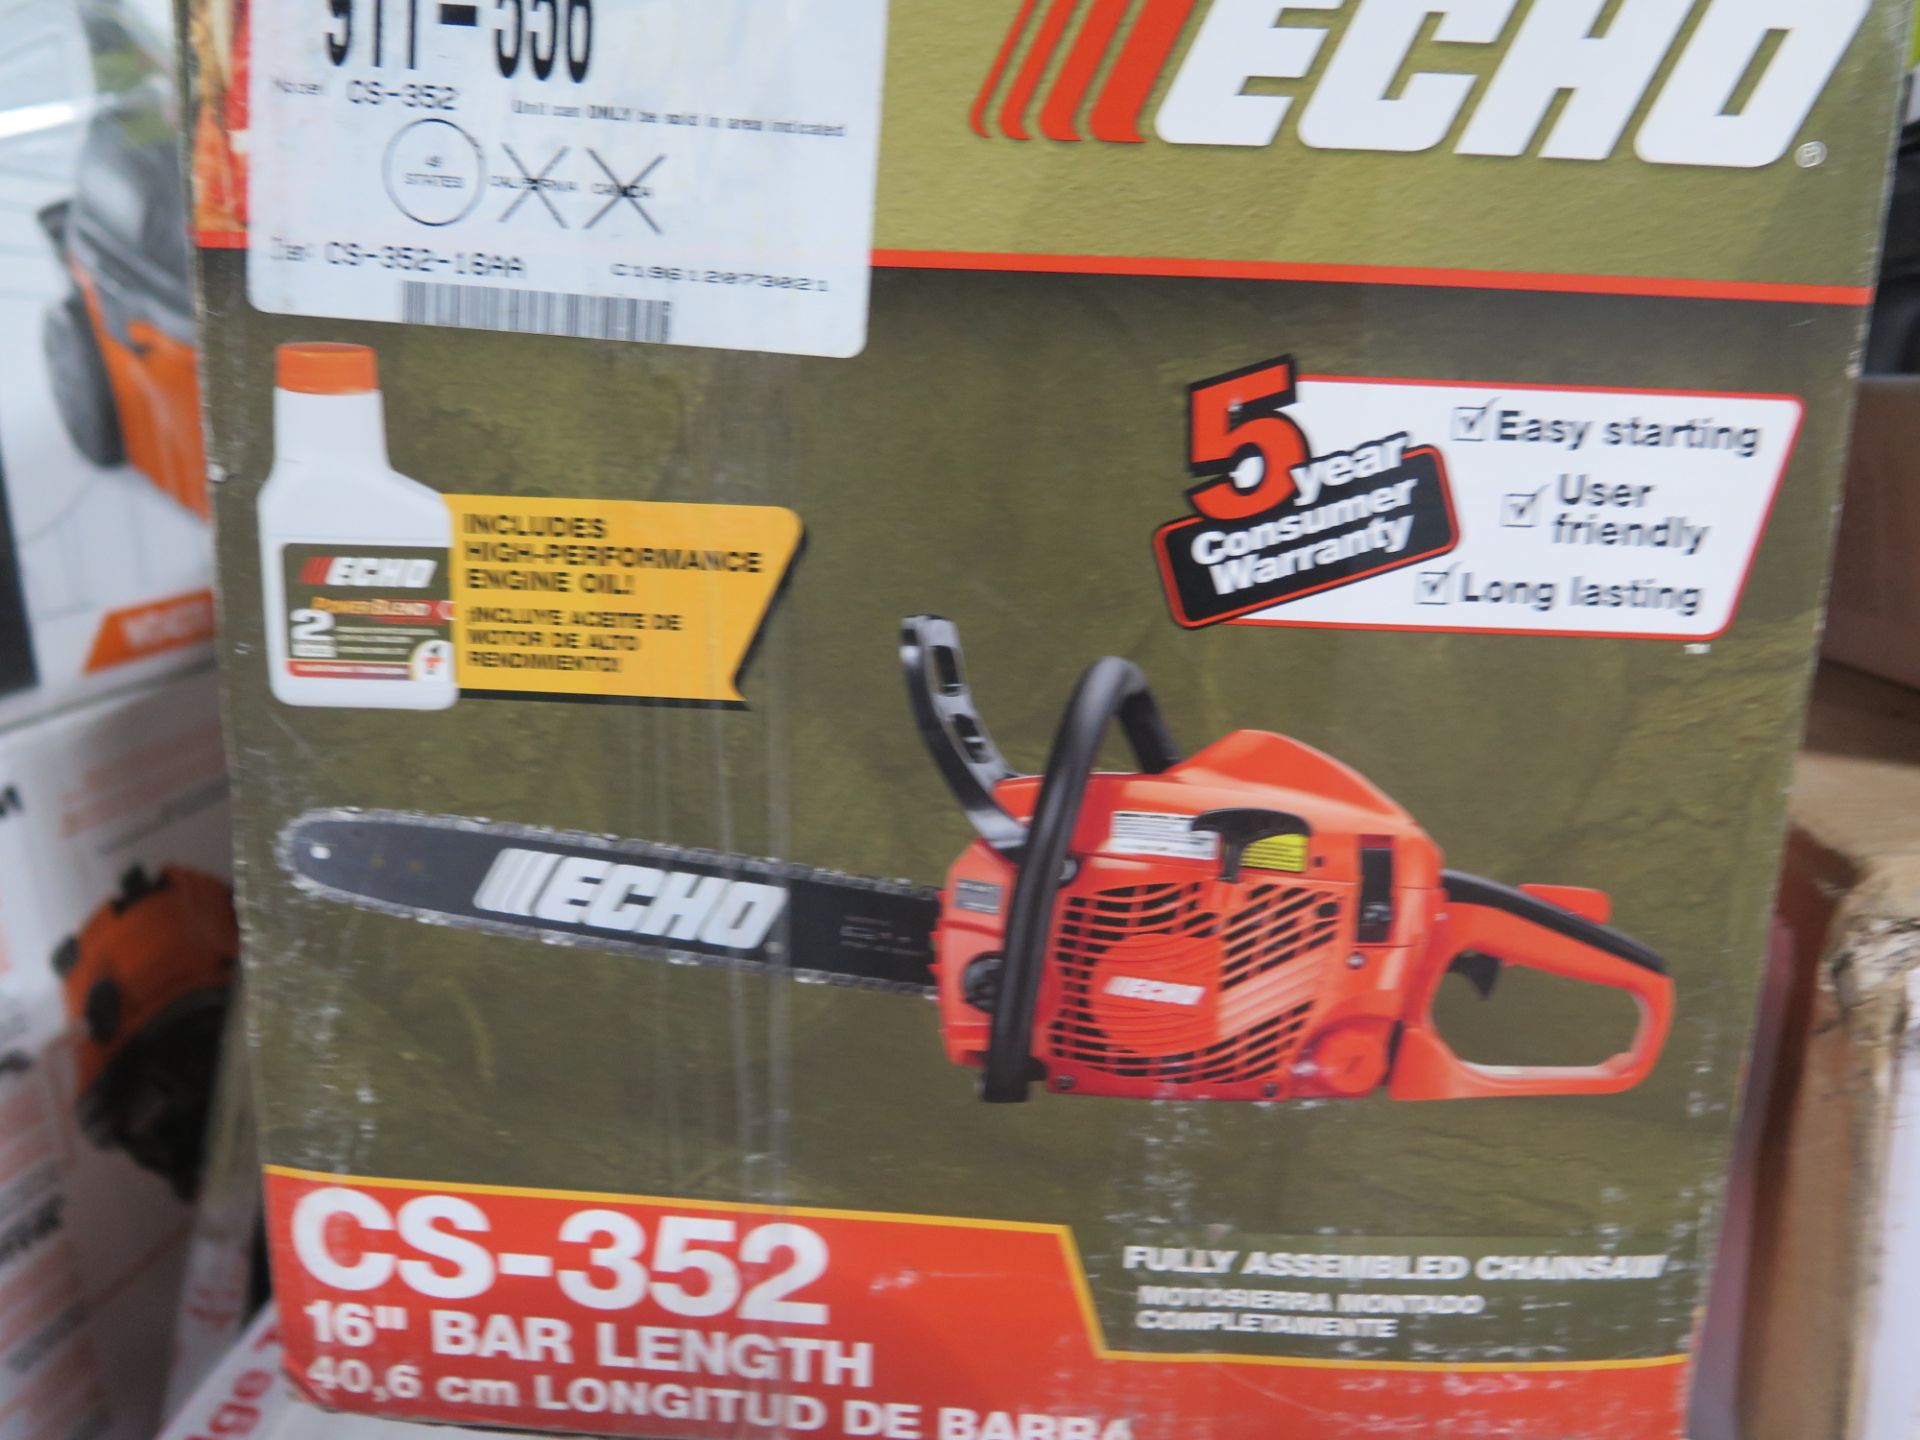 Lot of Trimmers, Wood Screws,Battery Charge,Tool Set,Cordless Chainsaw & Gas Grill with $1794 - Image 2 of 5